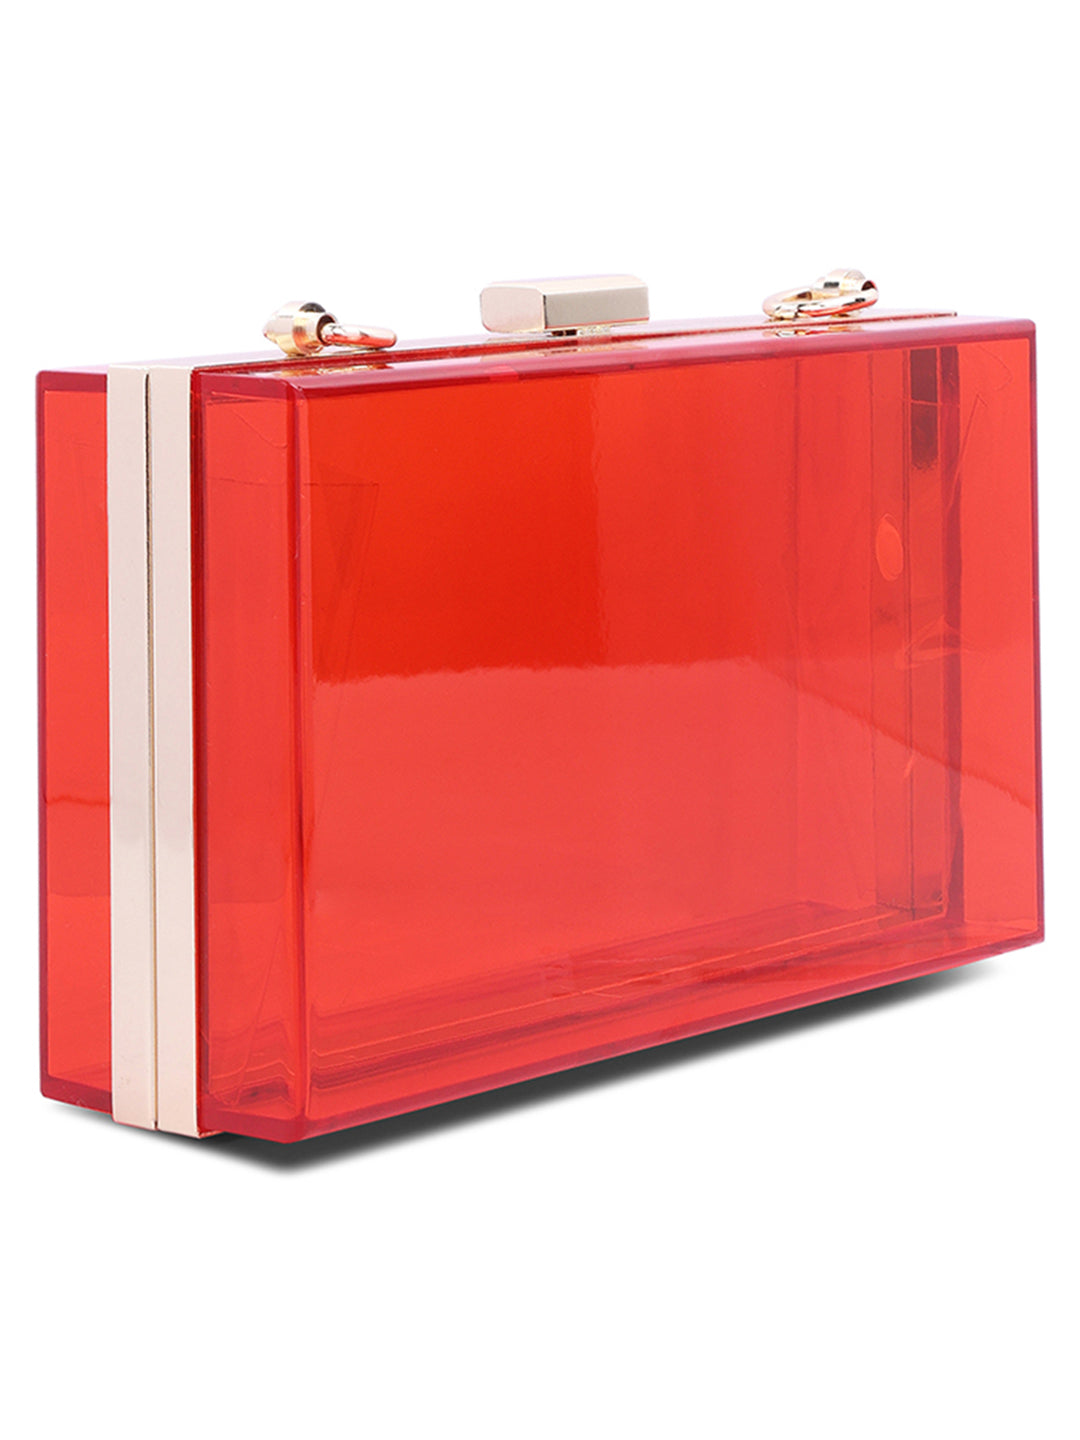 clear rectangle clutch bag#color_red